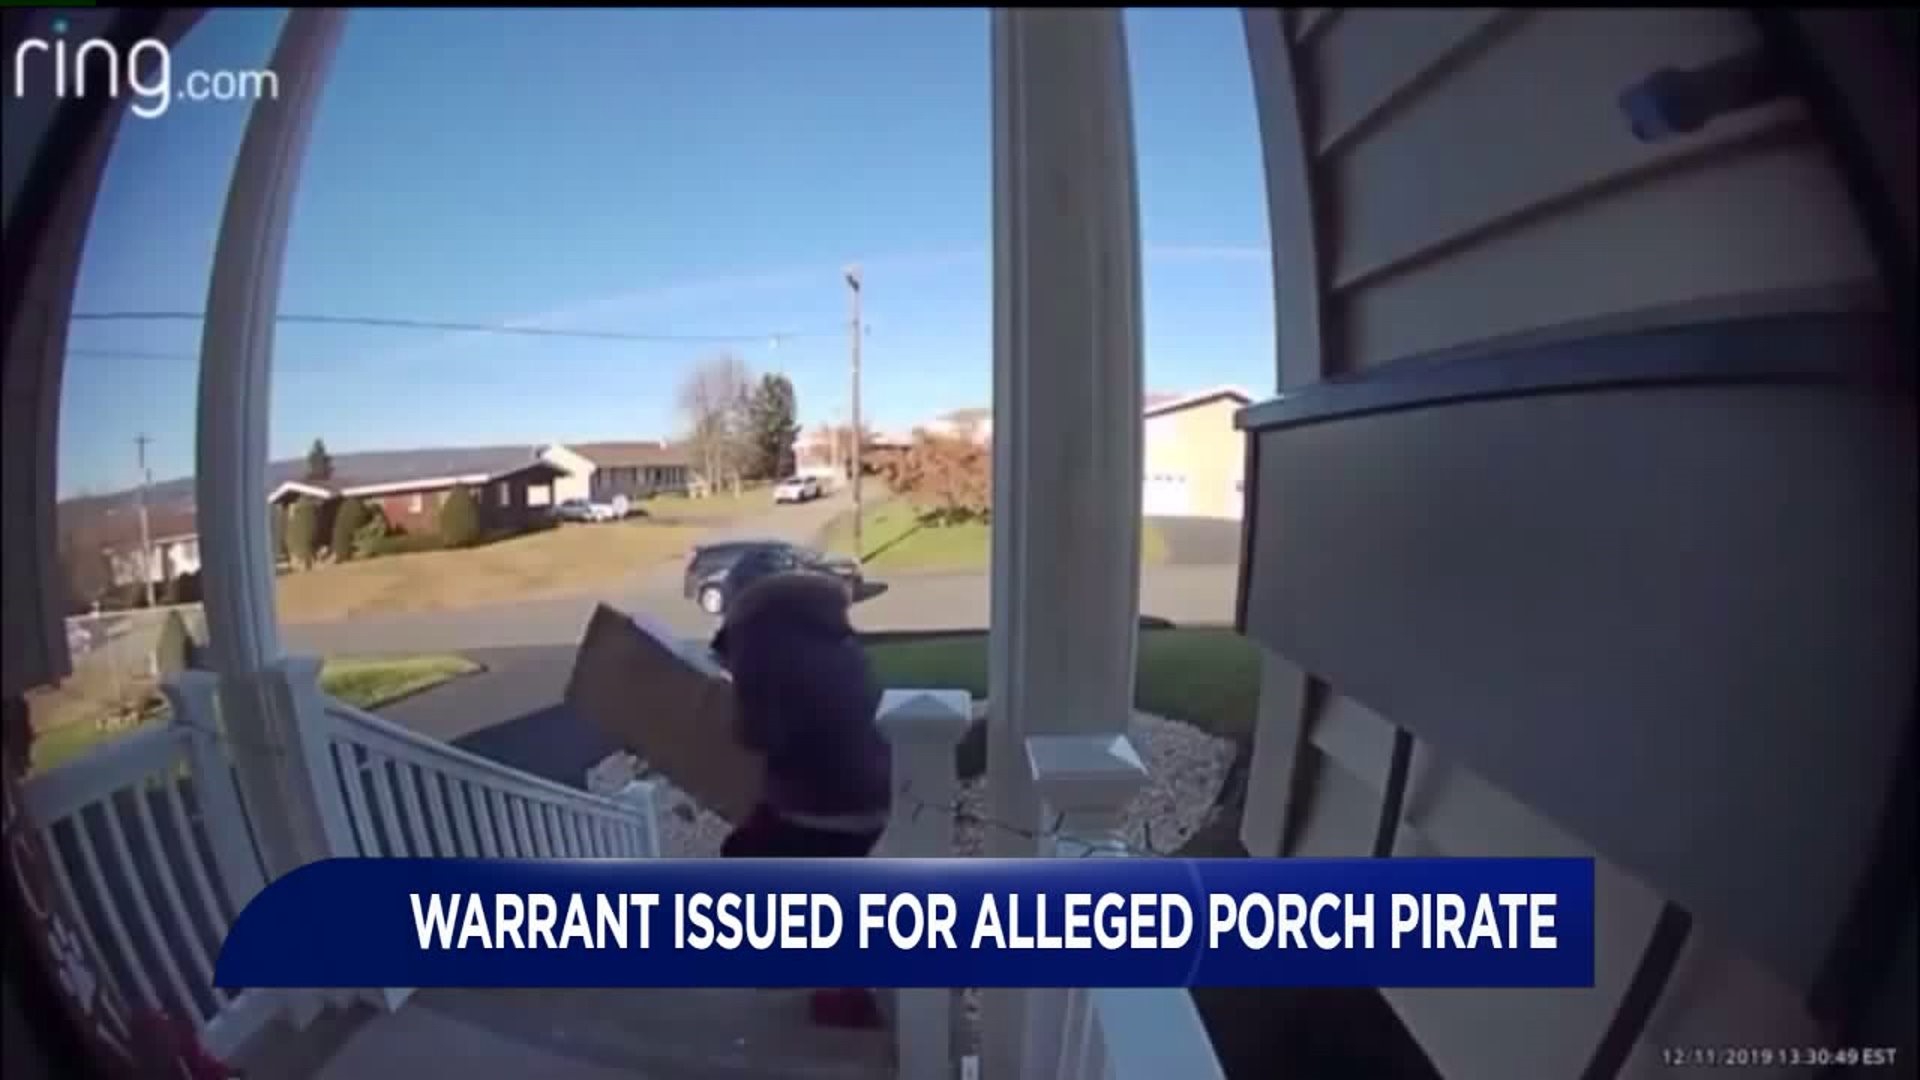 Warrant Out for Alleged Porch Pirate